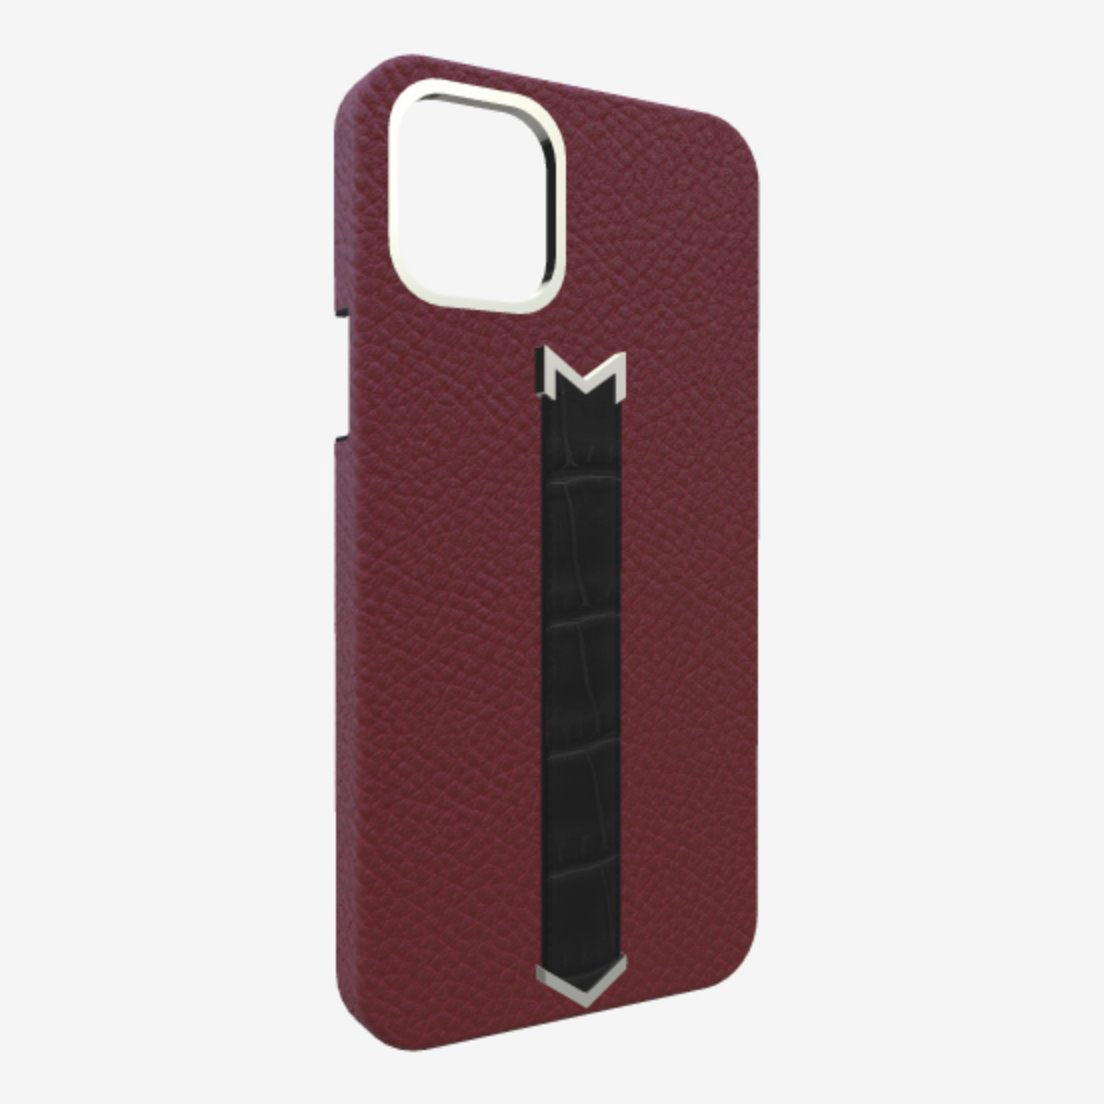 Silver Finger Strap Case for iPhone 13 Pro Max in Genuine Calfskin and Alligator Burgundy-Palace Bond-Black 